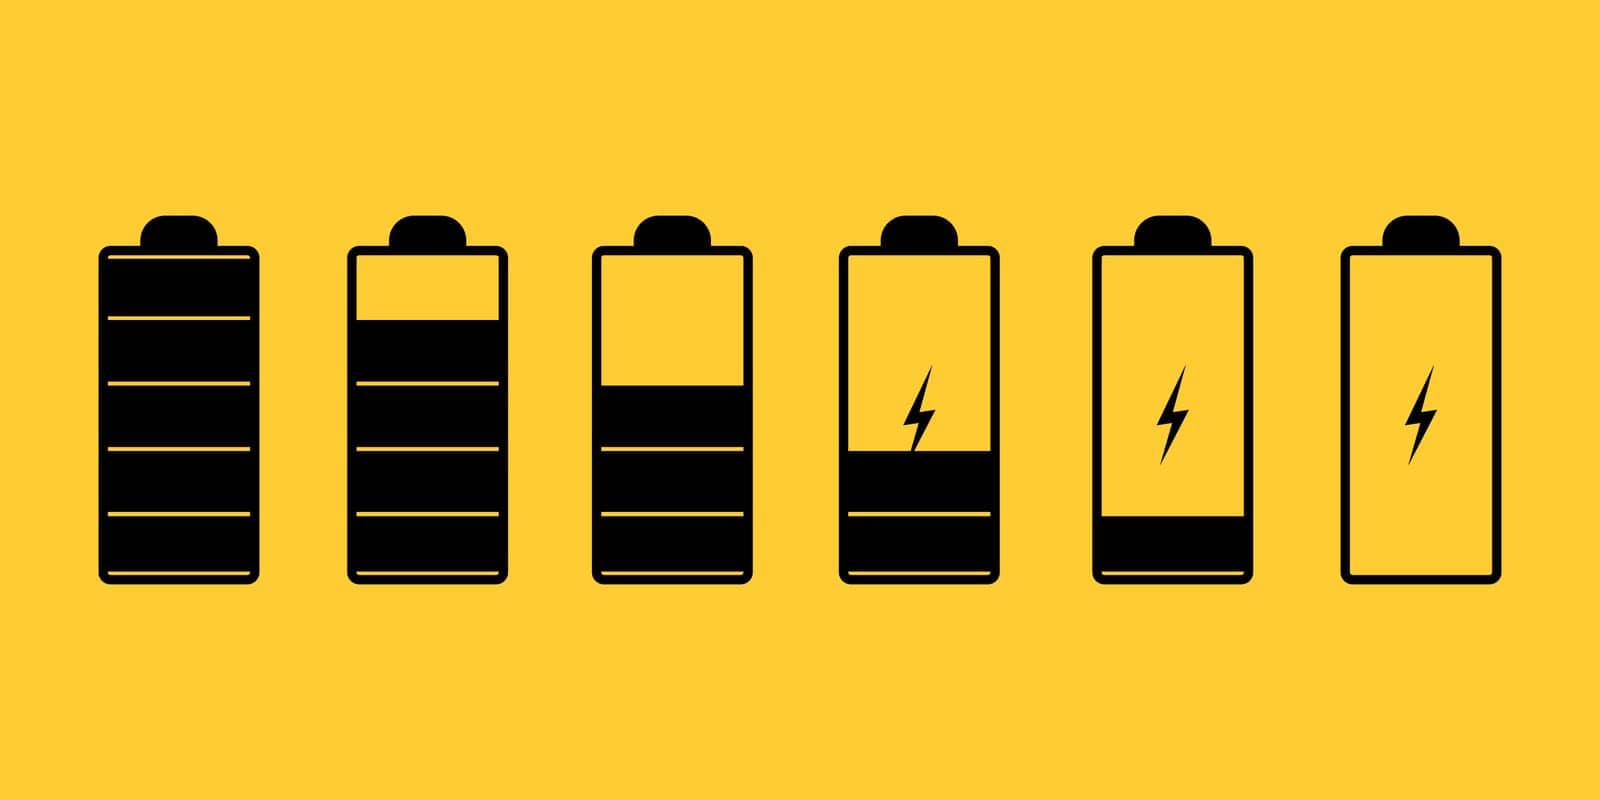 Set of illustrations comparing full and low battery. Black and Yellow color. Vector icon